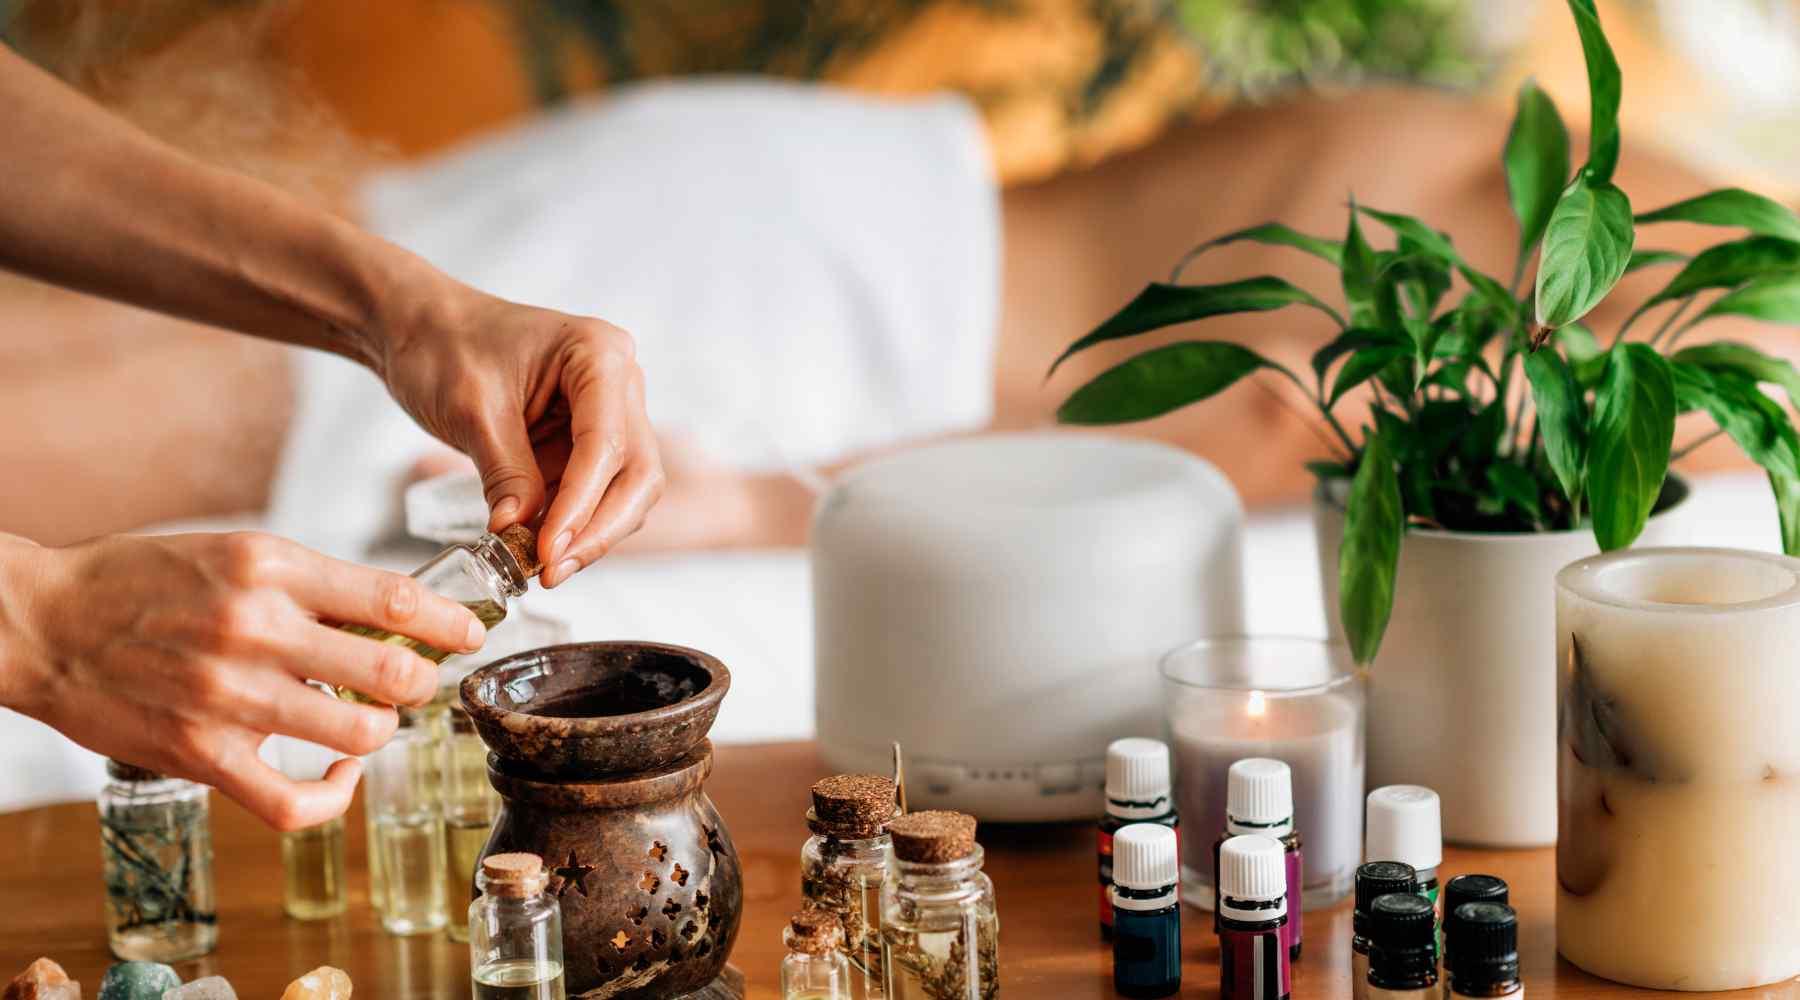 7 Of The Best Essential Oils For Men - Young Living Essential Oils